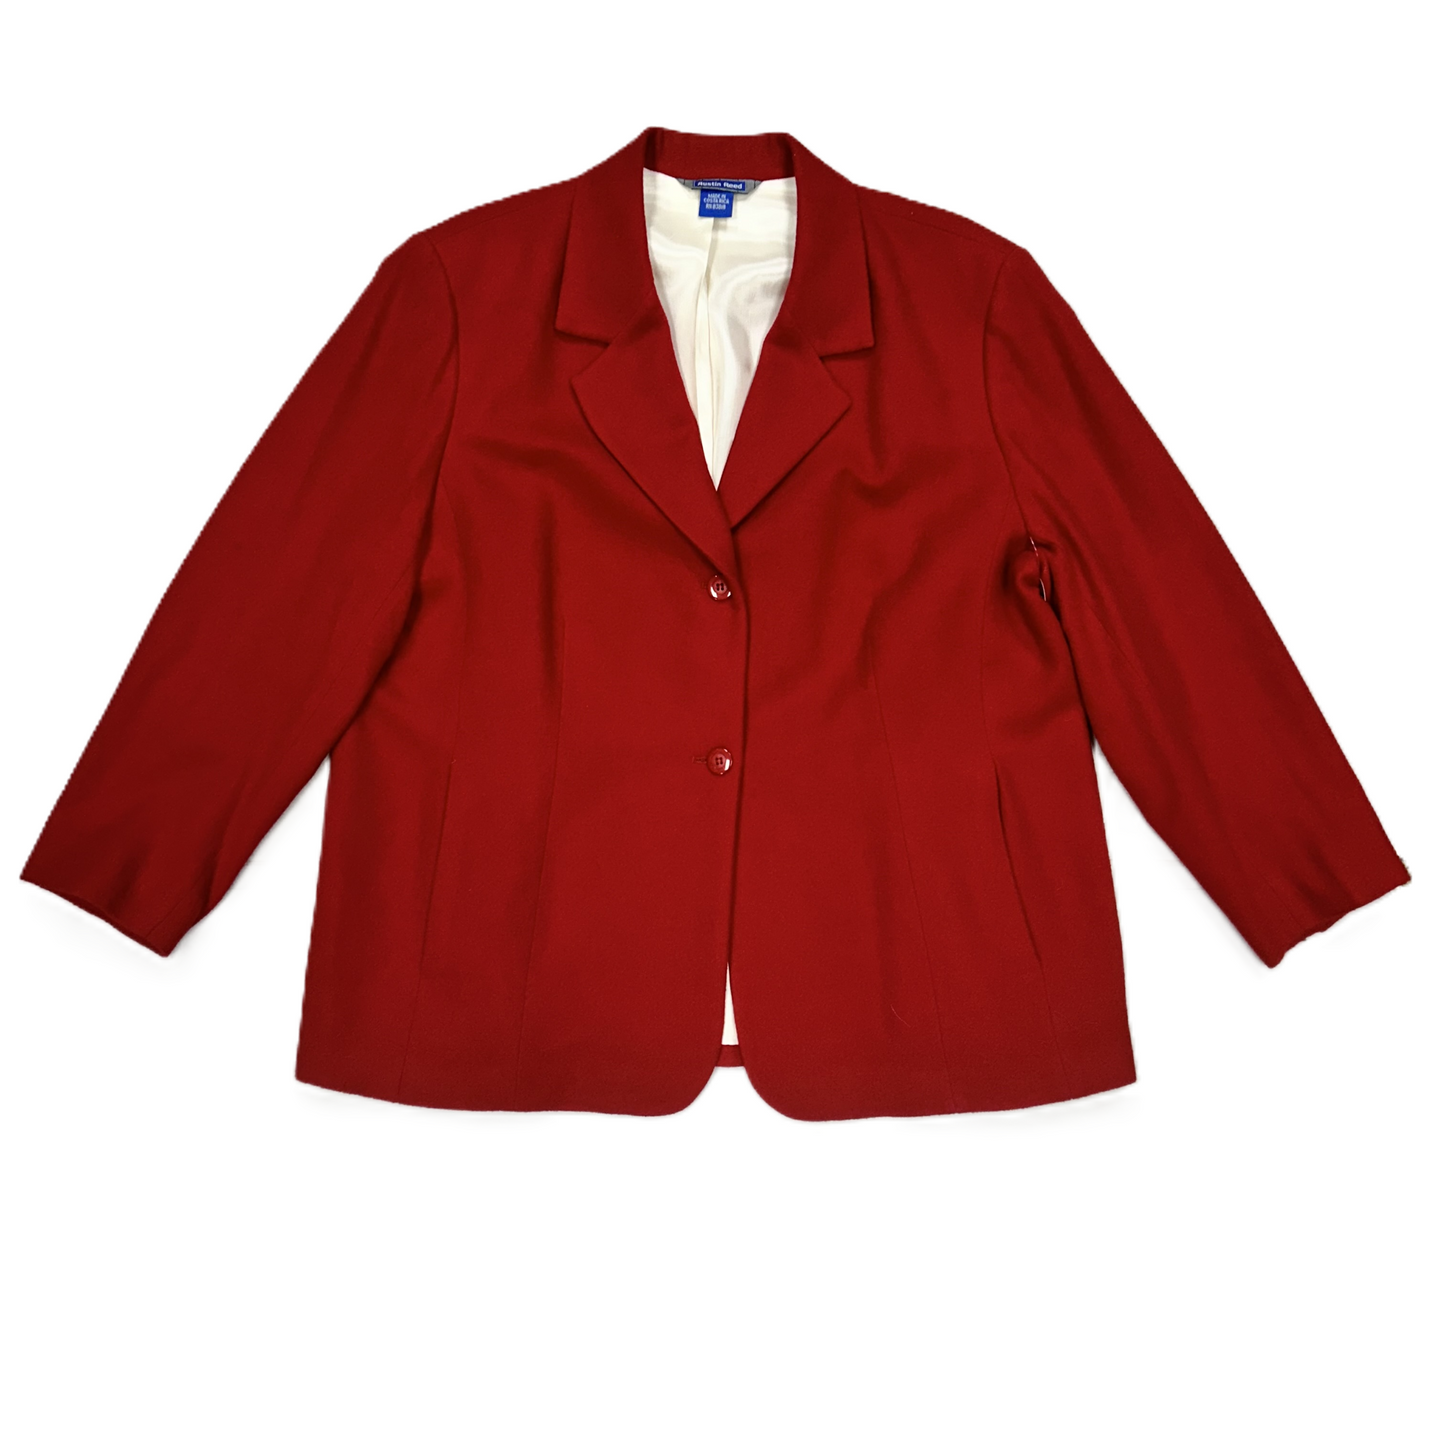 Red Coat Peacoat By Austin Reed, Size: 3x